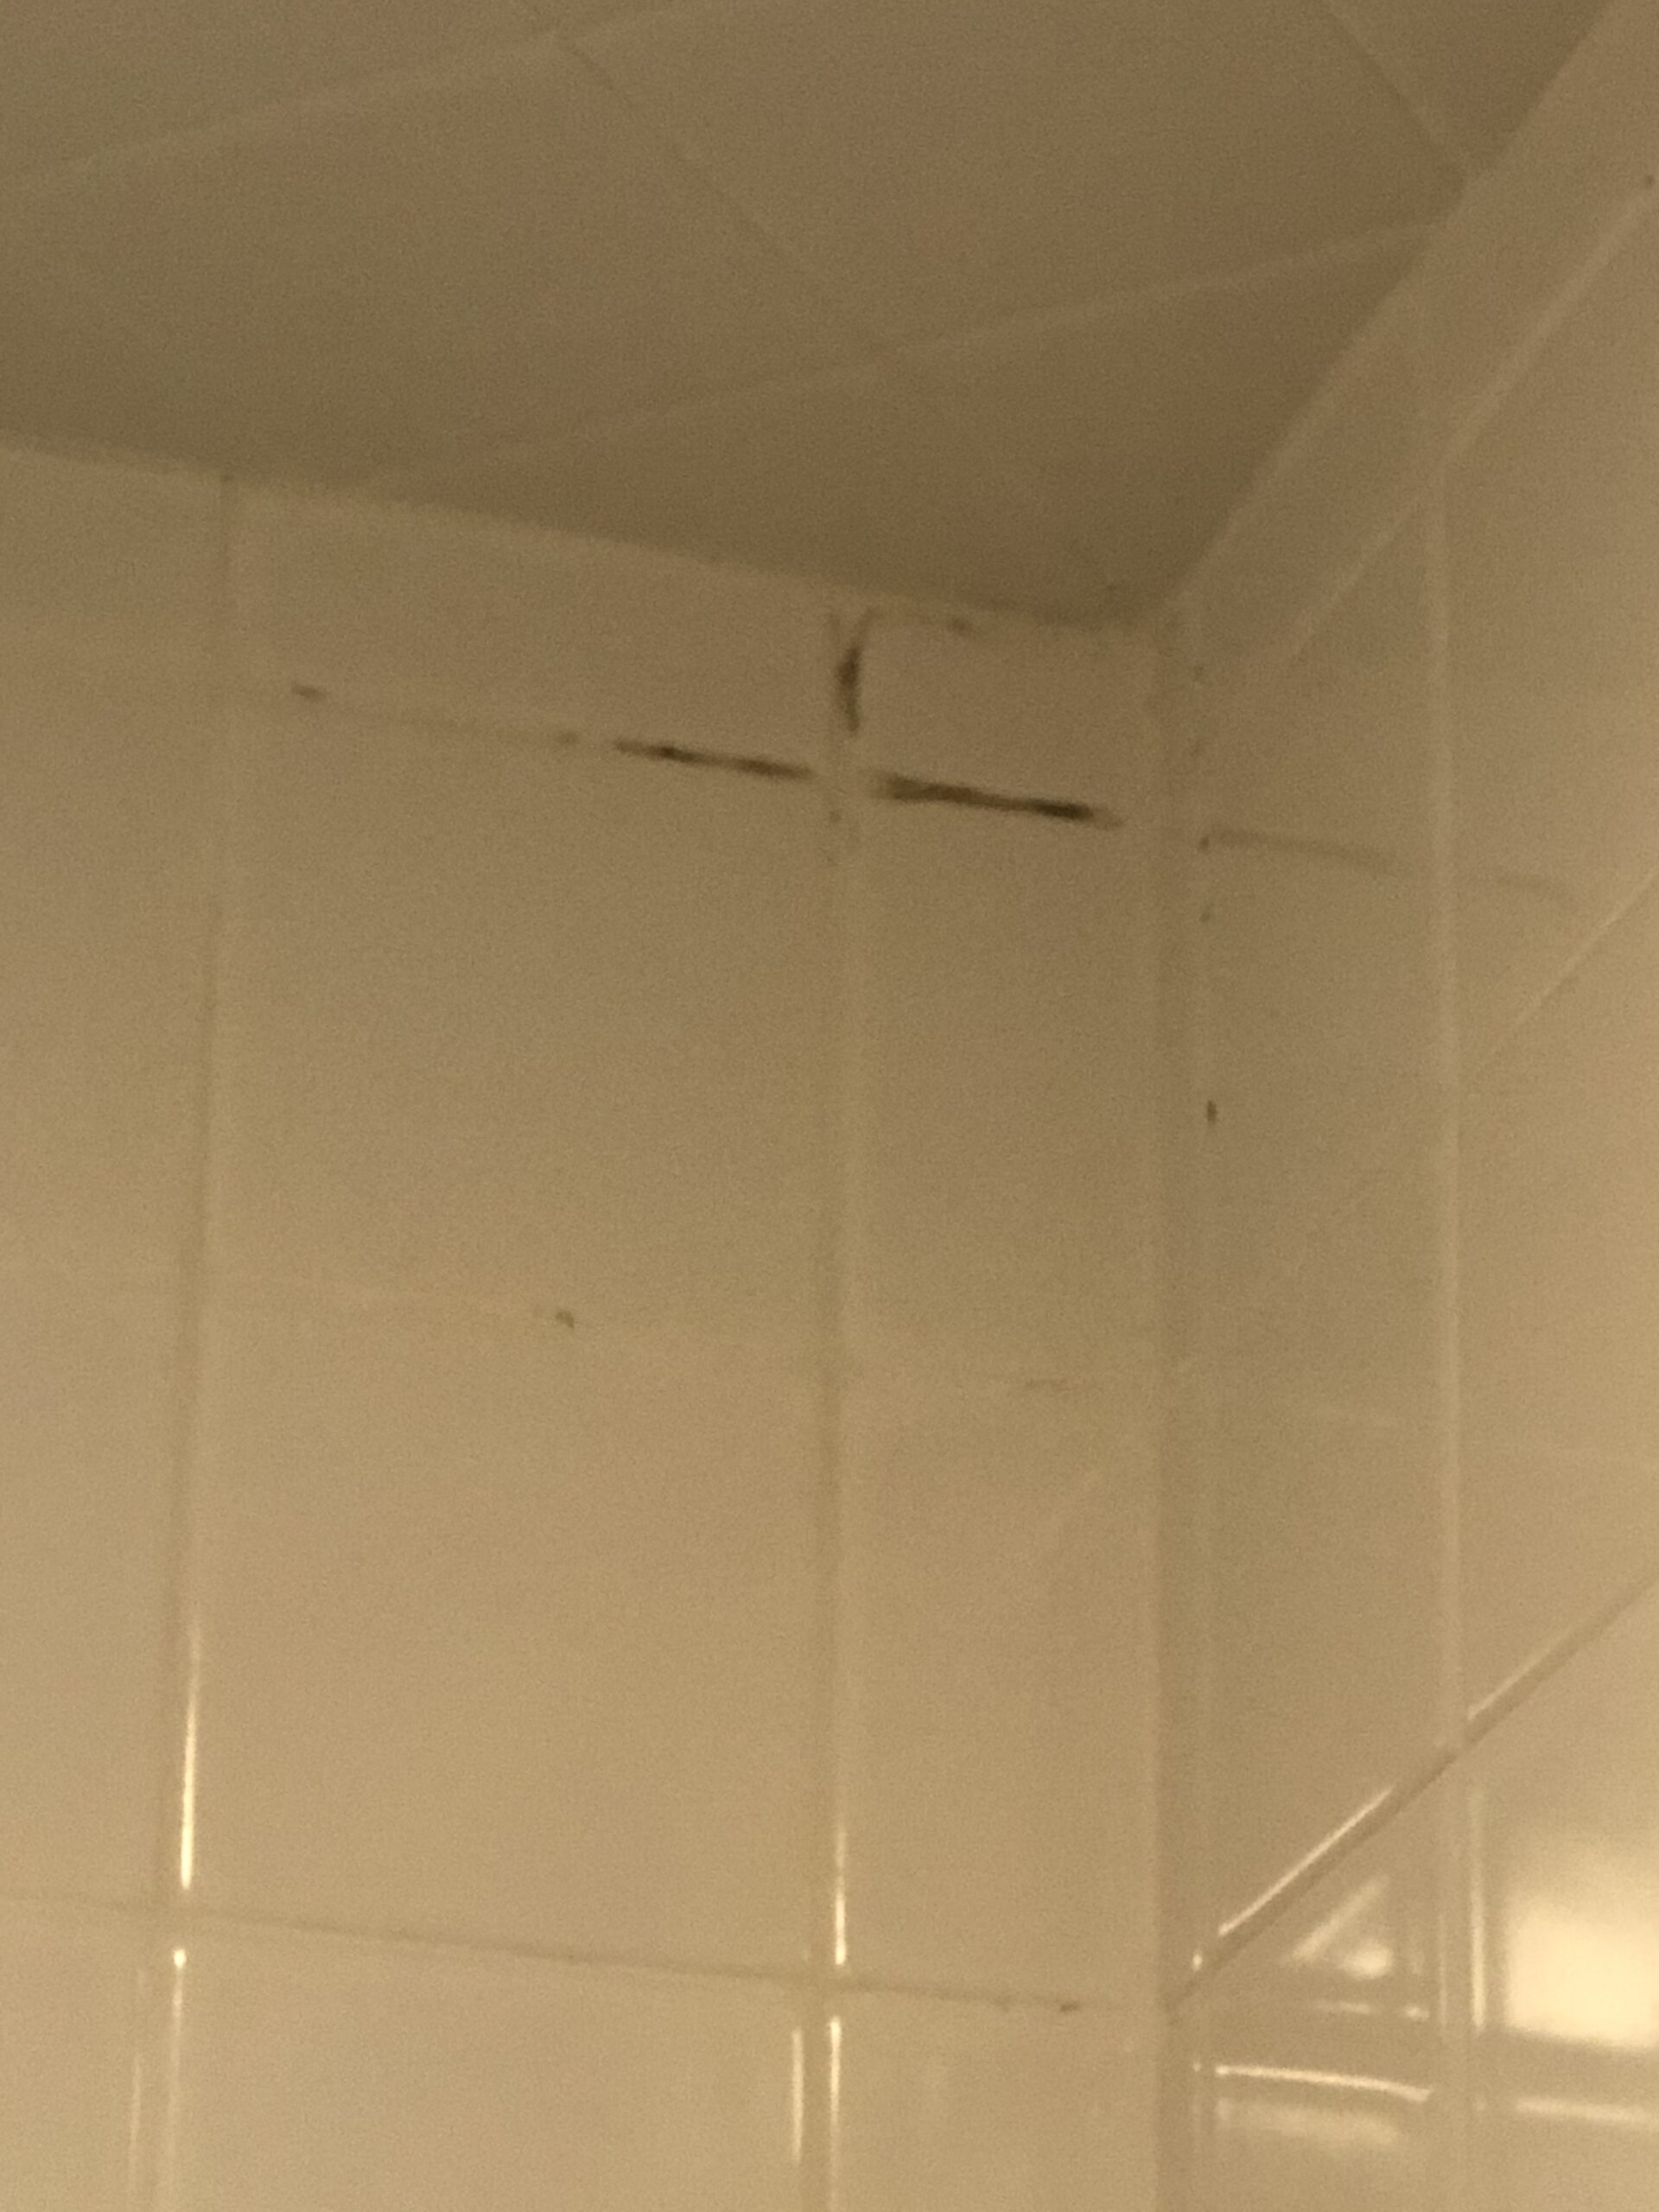 mold-in-shower-stall